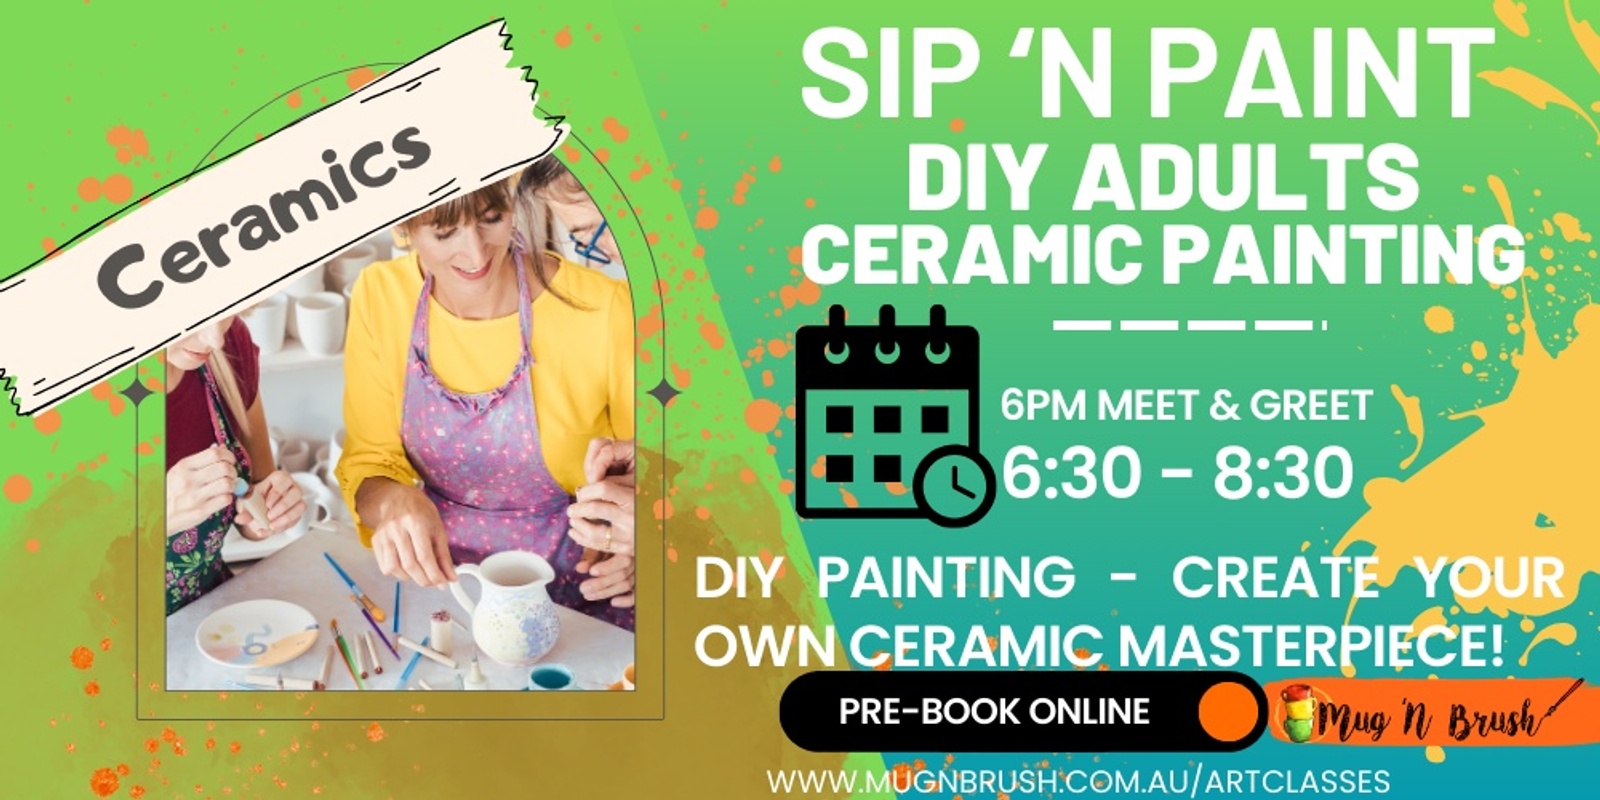 Banner image for Sip 'n Paint Evening 18+  Ceramic Painting